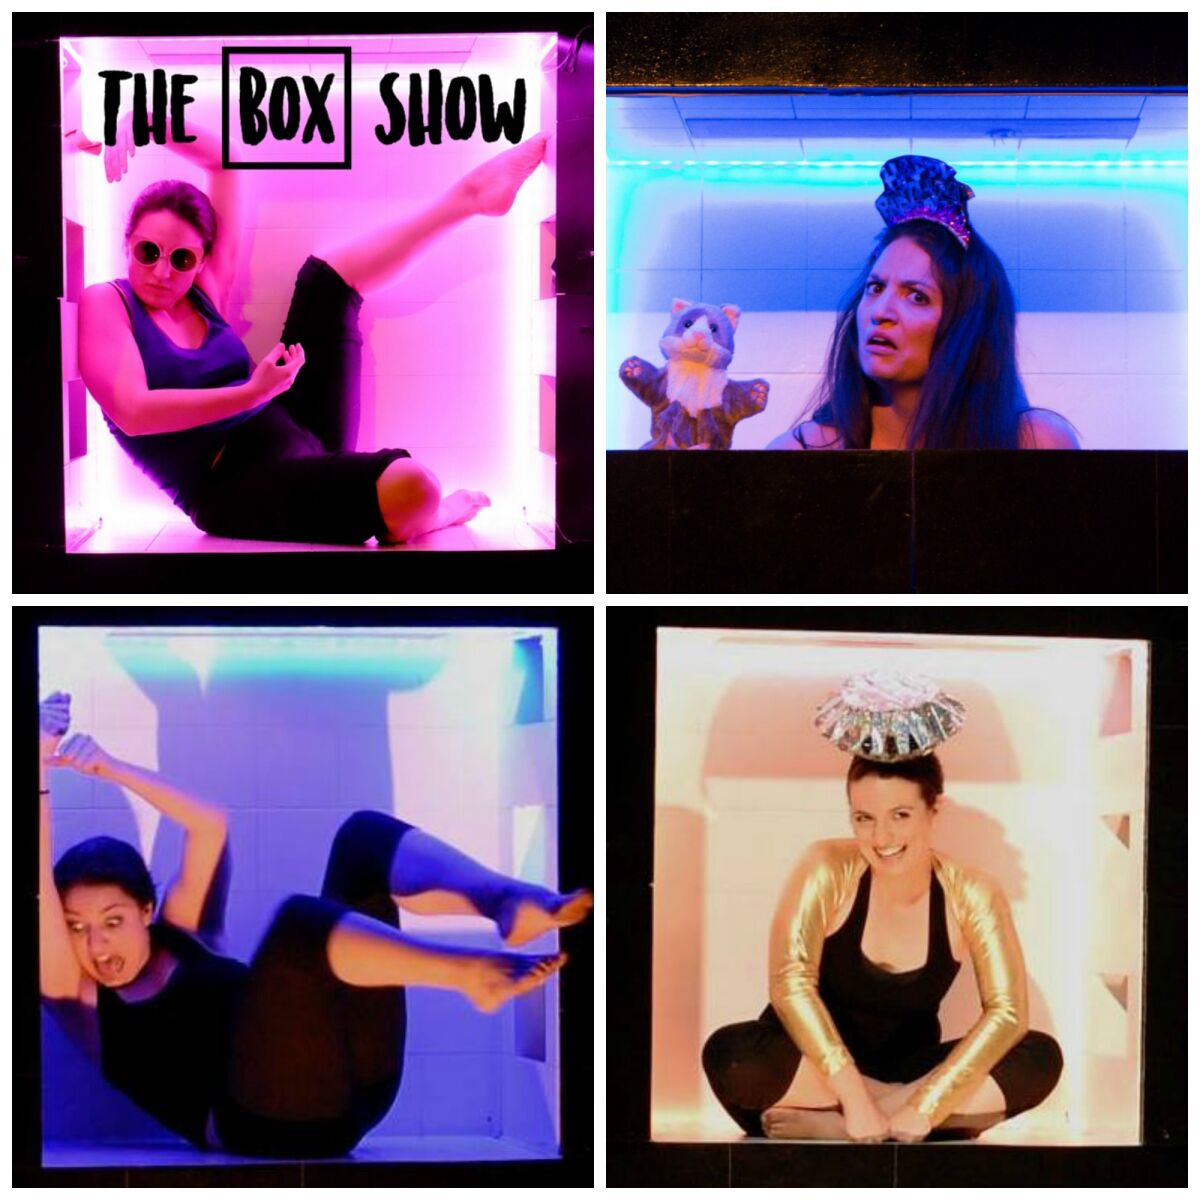 "The Box Show" is a one-woman production with Dominique Salerno playing 30 roles inside a box.